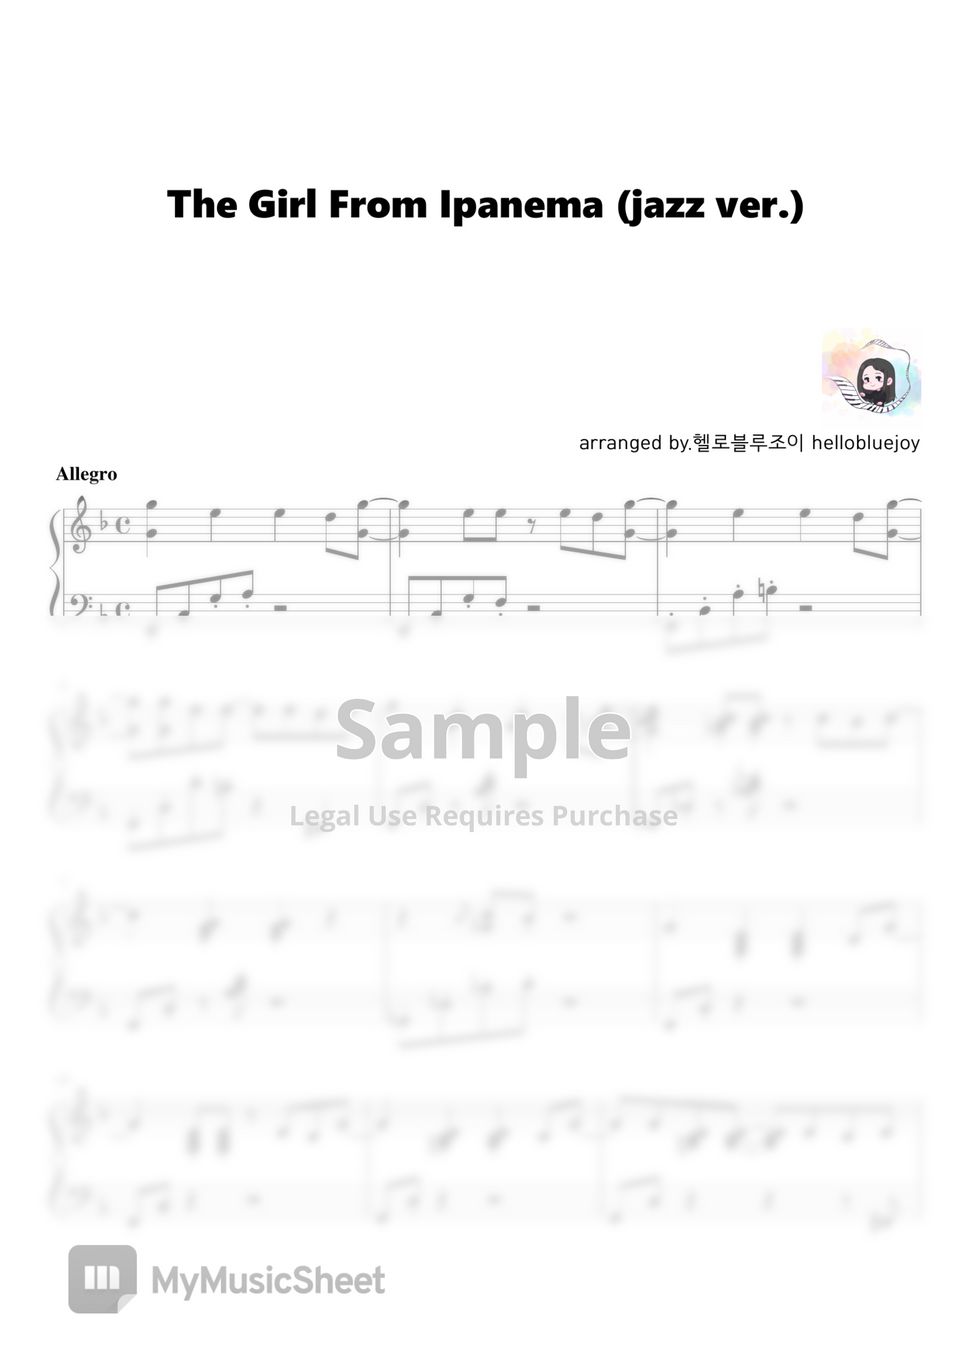 A.C.Jobim - The Girl From Ipanema (jazz ver.) by 헬로블루조이